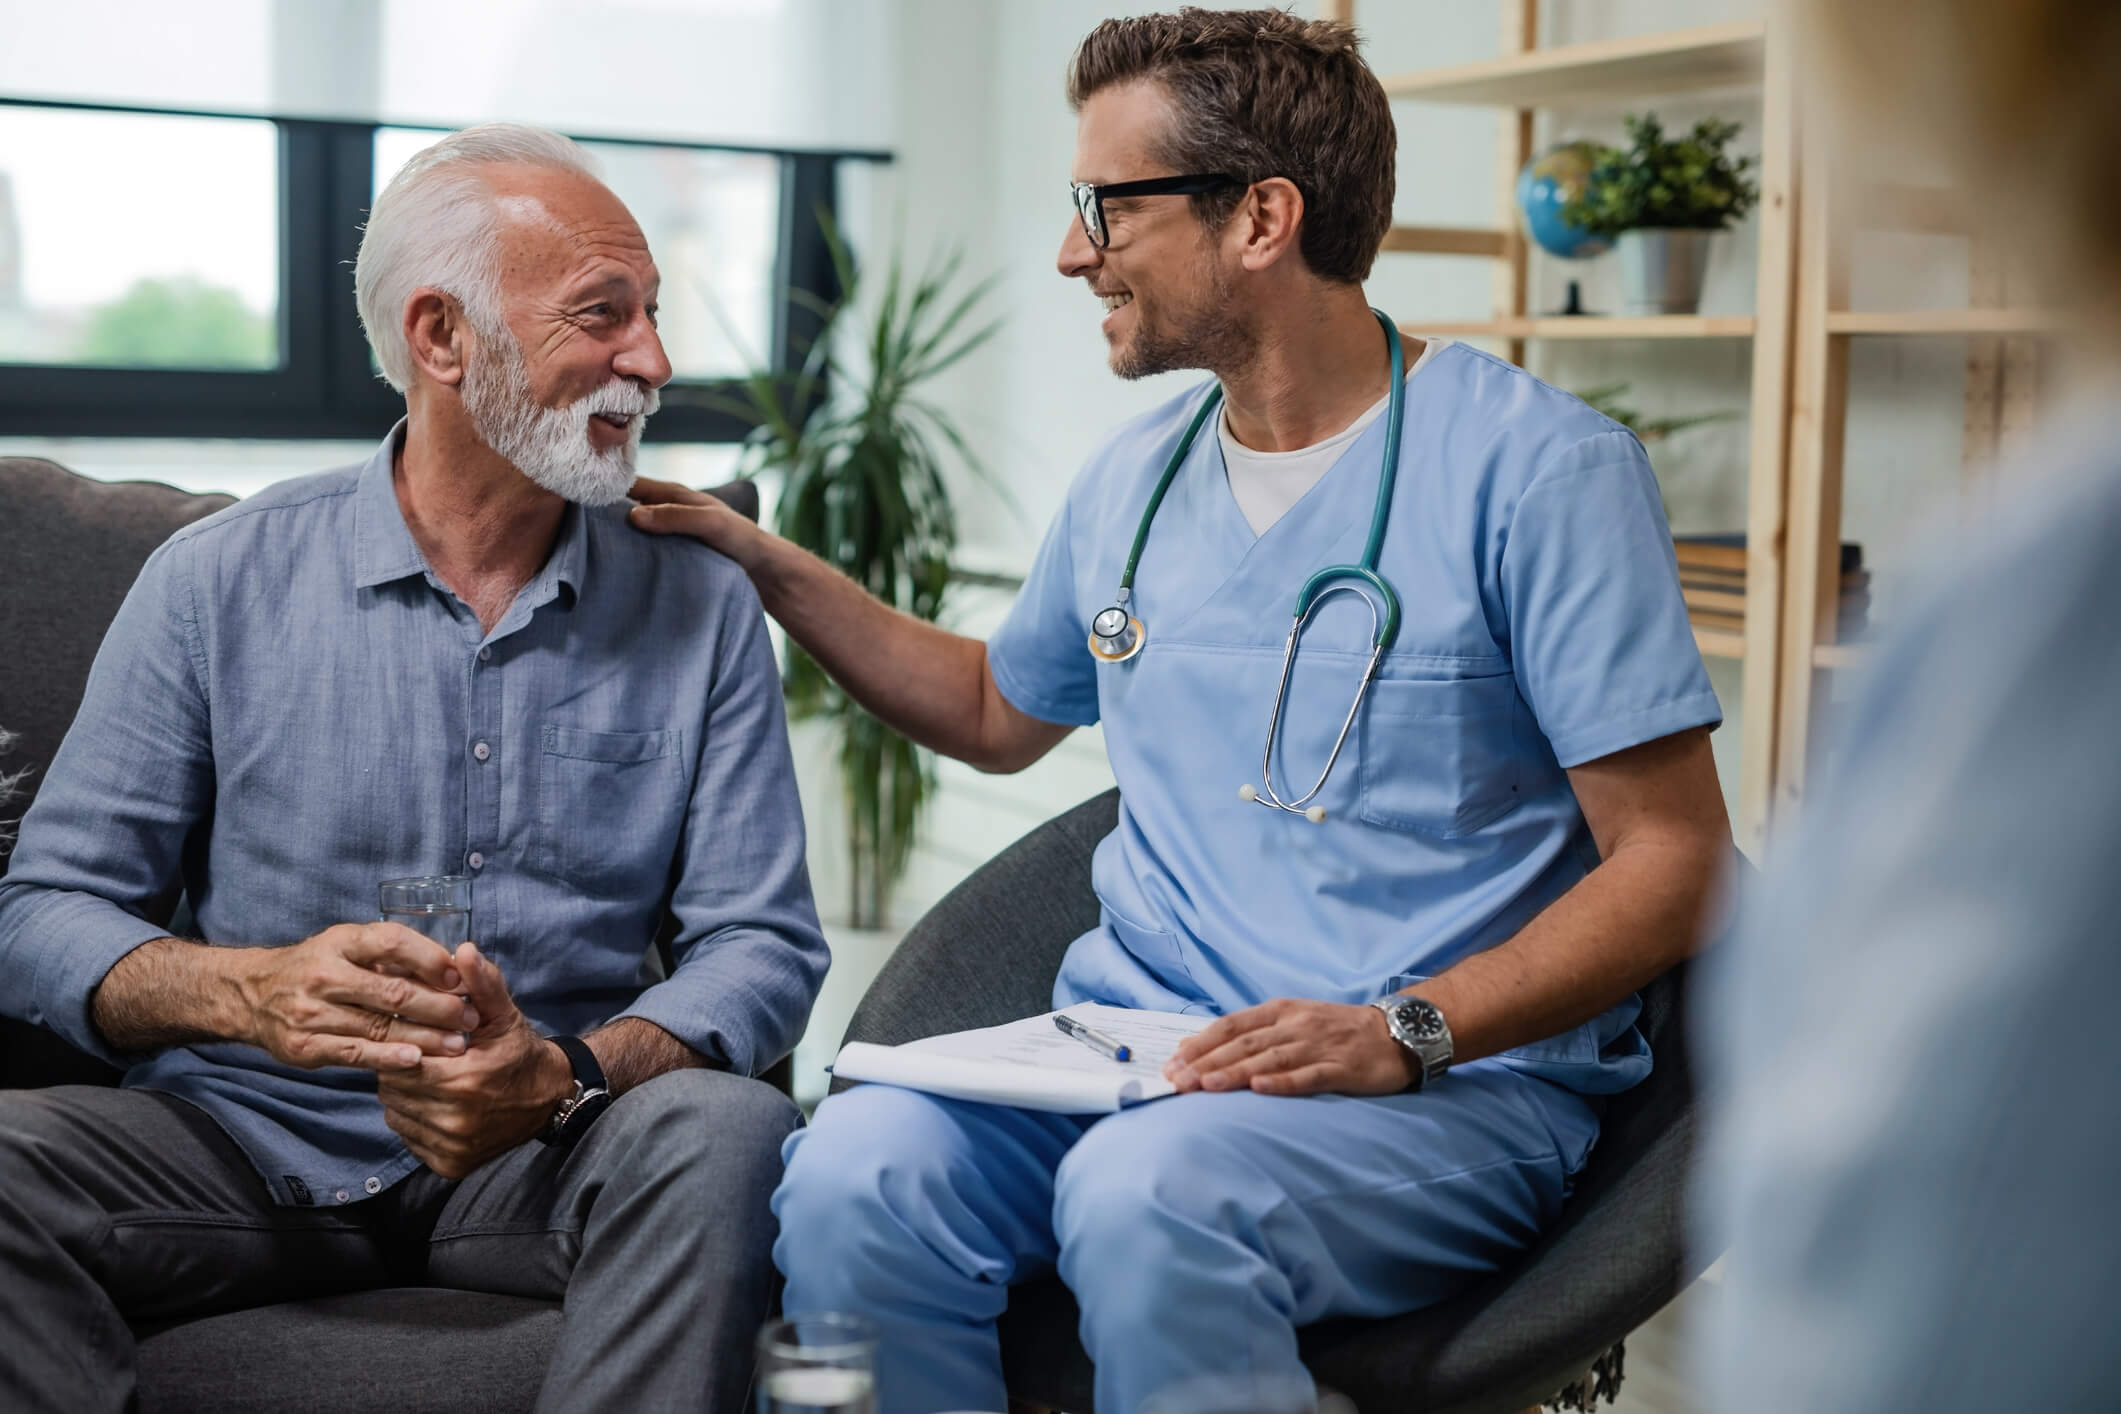 Older patient discussing integrative healthcare with his doctor.